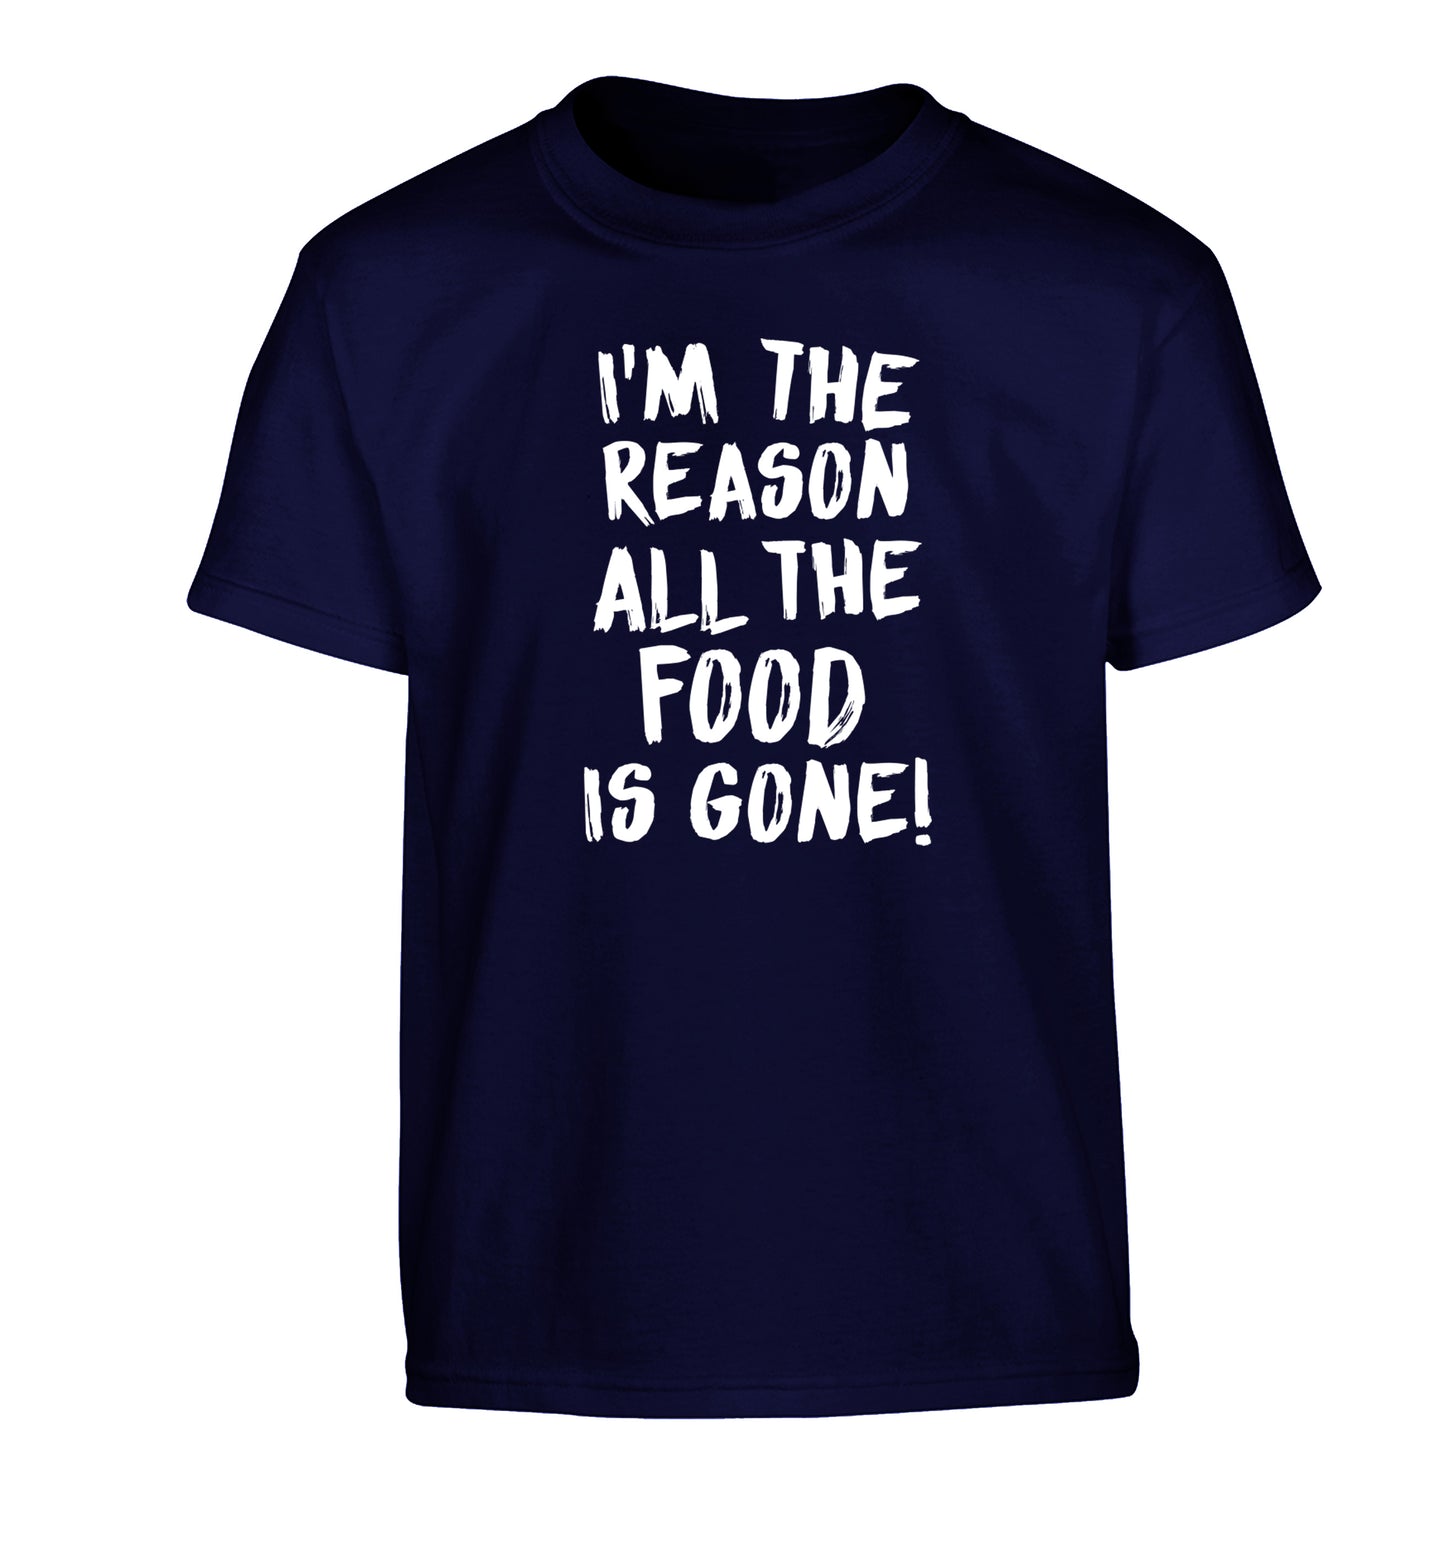 I'm the reason why all the food is gone Children's navy Tshirt 12-13 Years